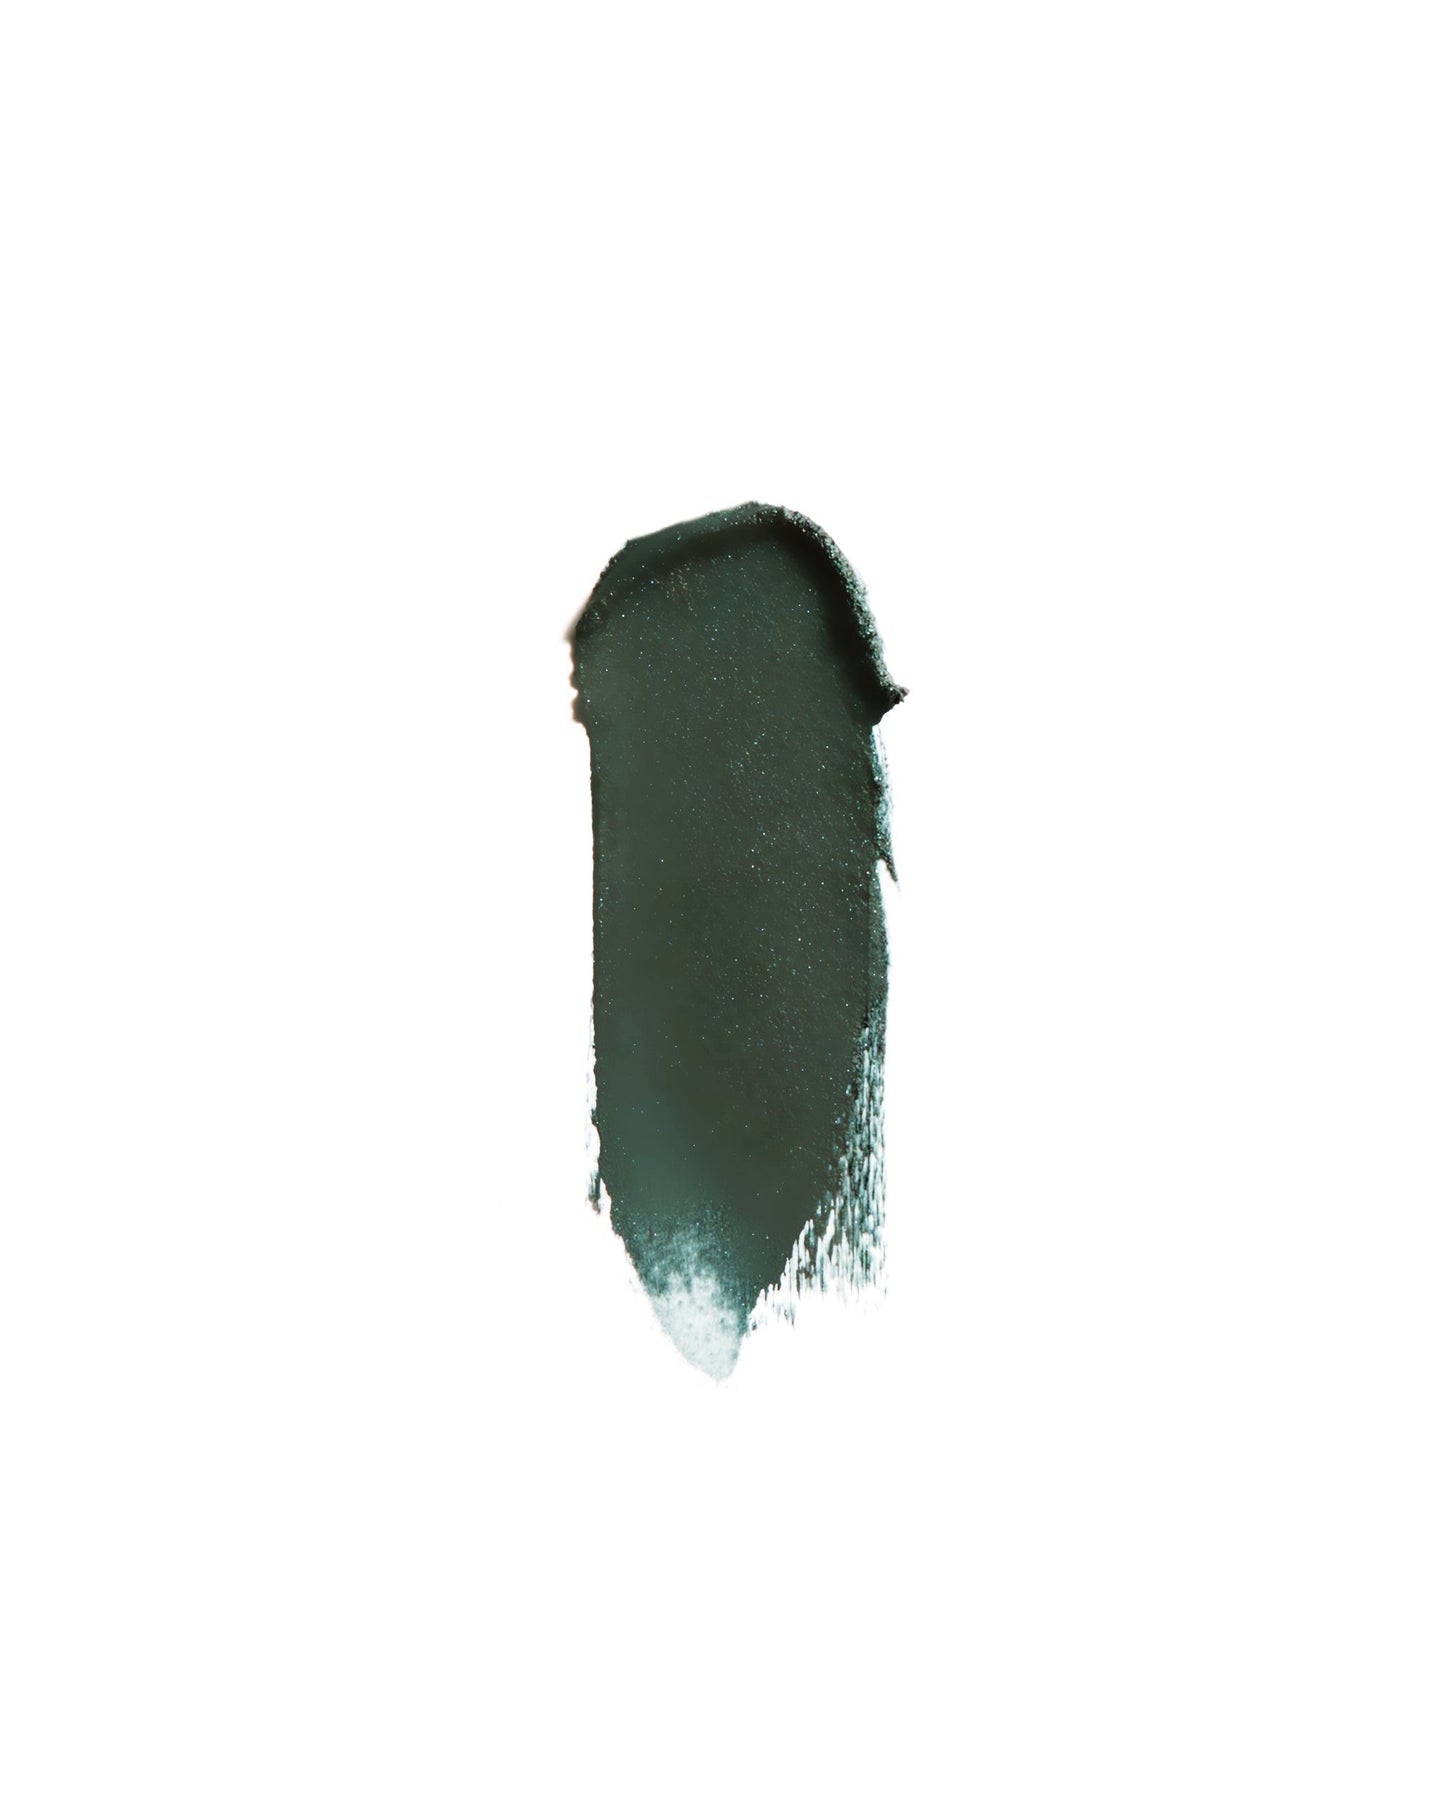 Sublime (dark moody green with a velvet finish)